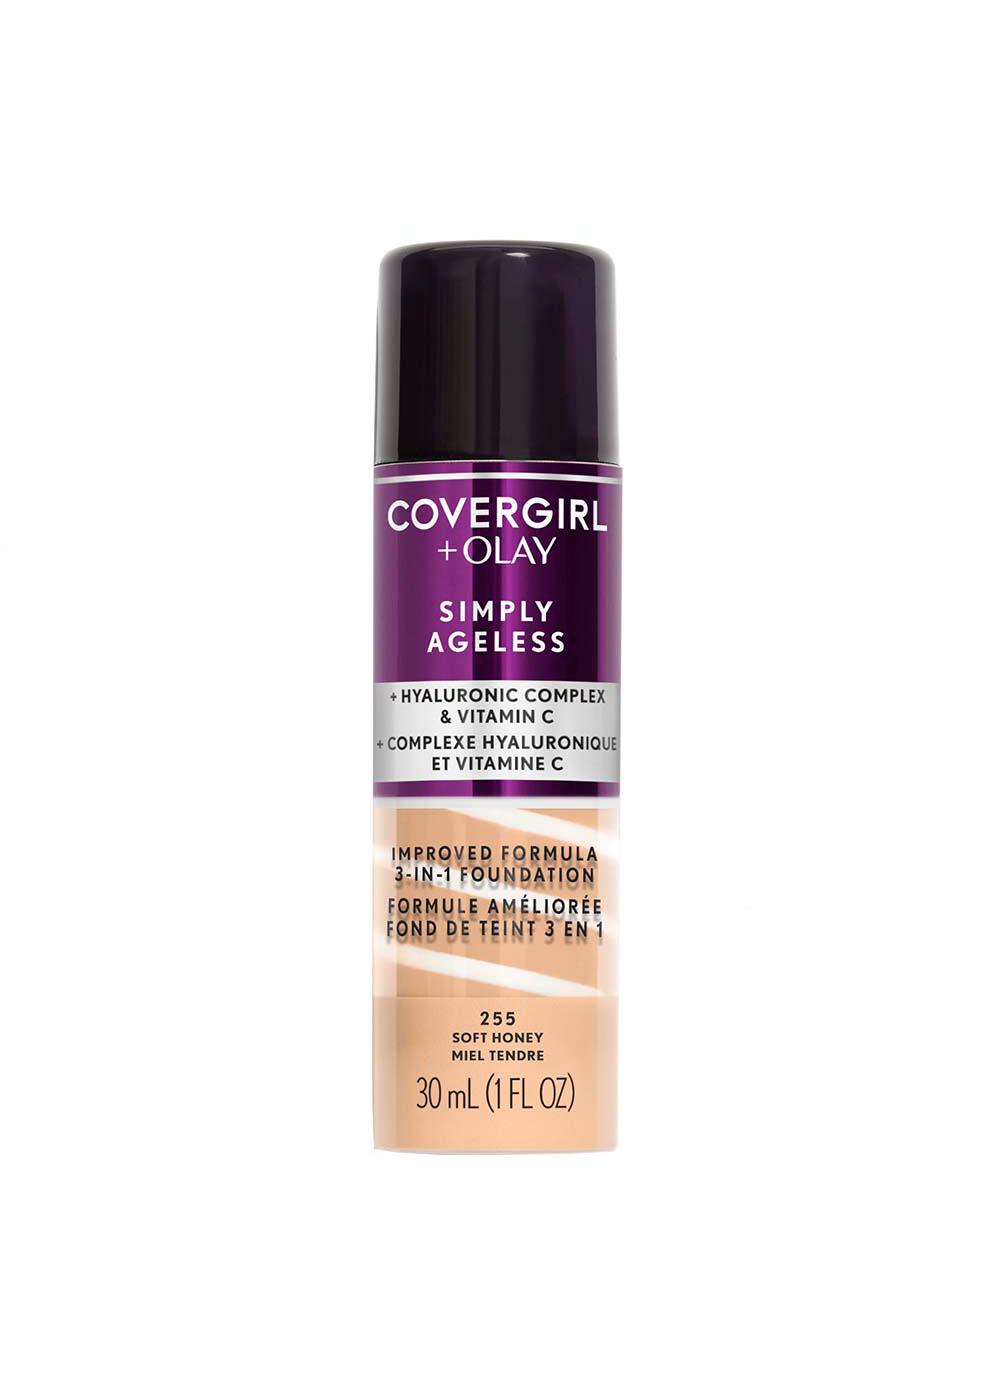 Covergirl Simply Ageless 3-in-1 Liquid Foundation 255 Soft Honey; image 1 of 6